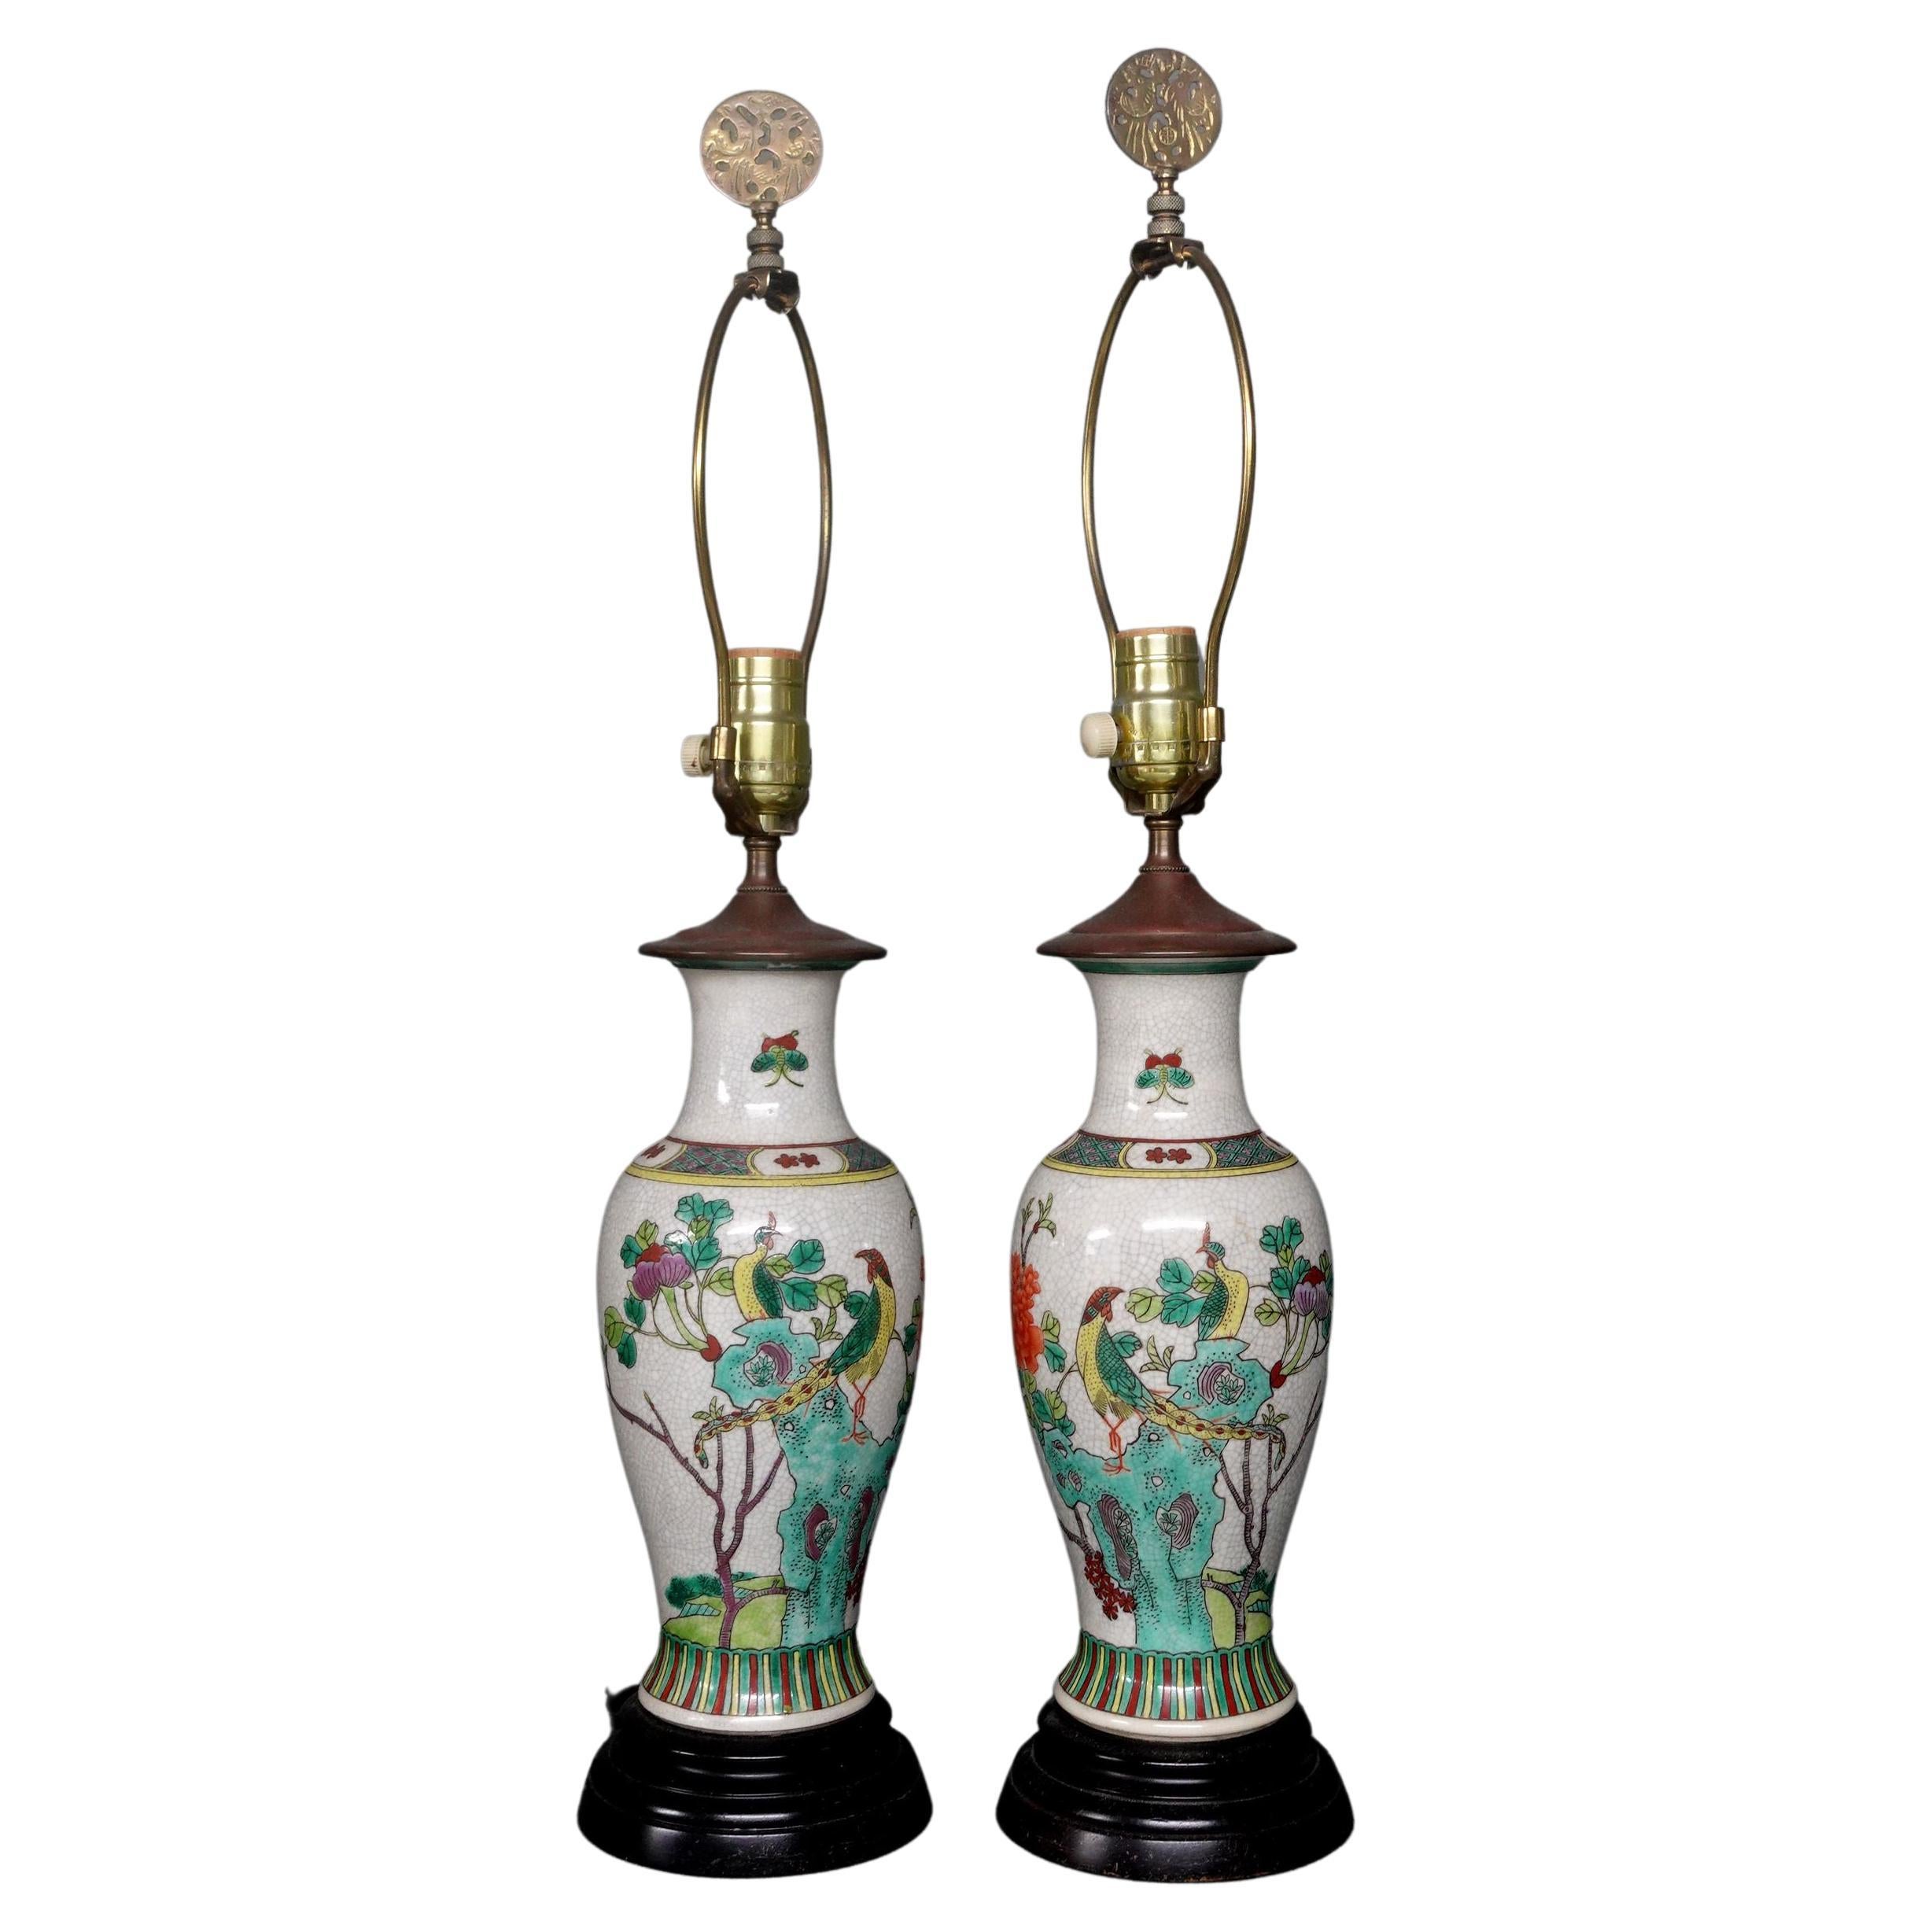 Pair of Chinese Famille Verte Vases Mounted as Lamps